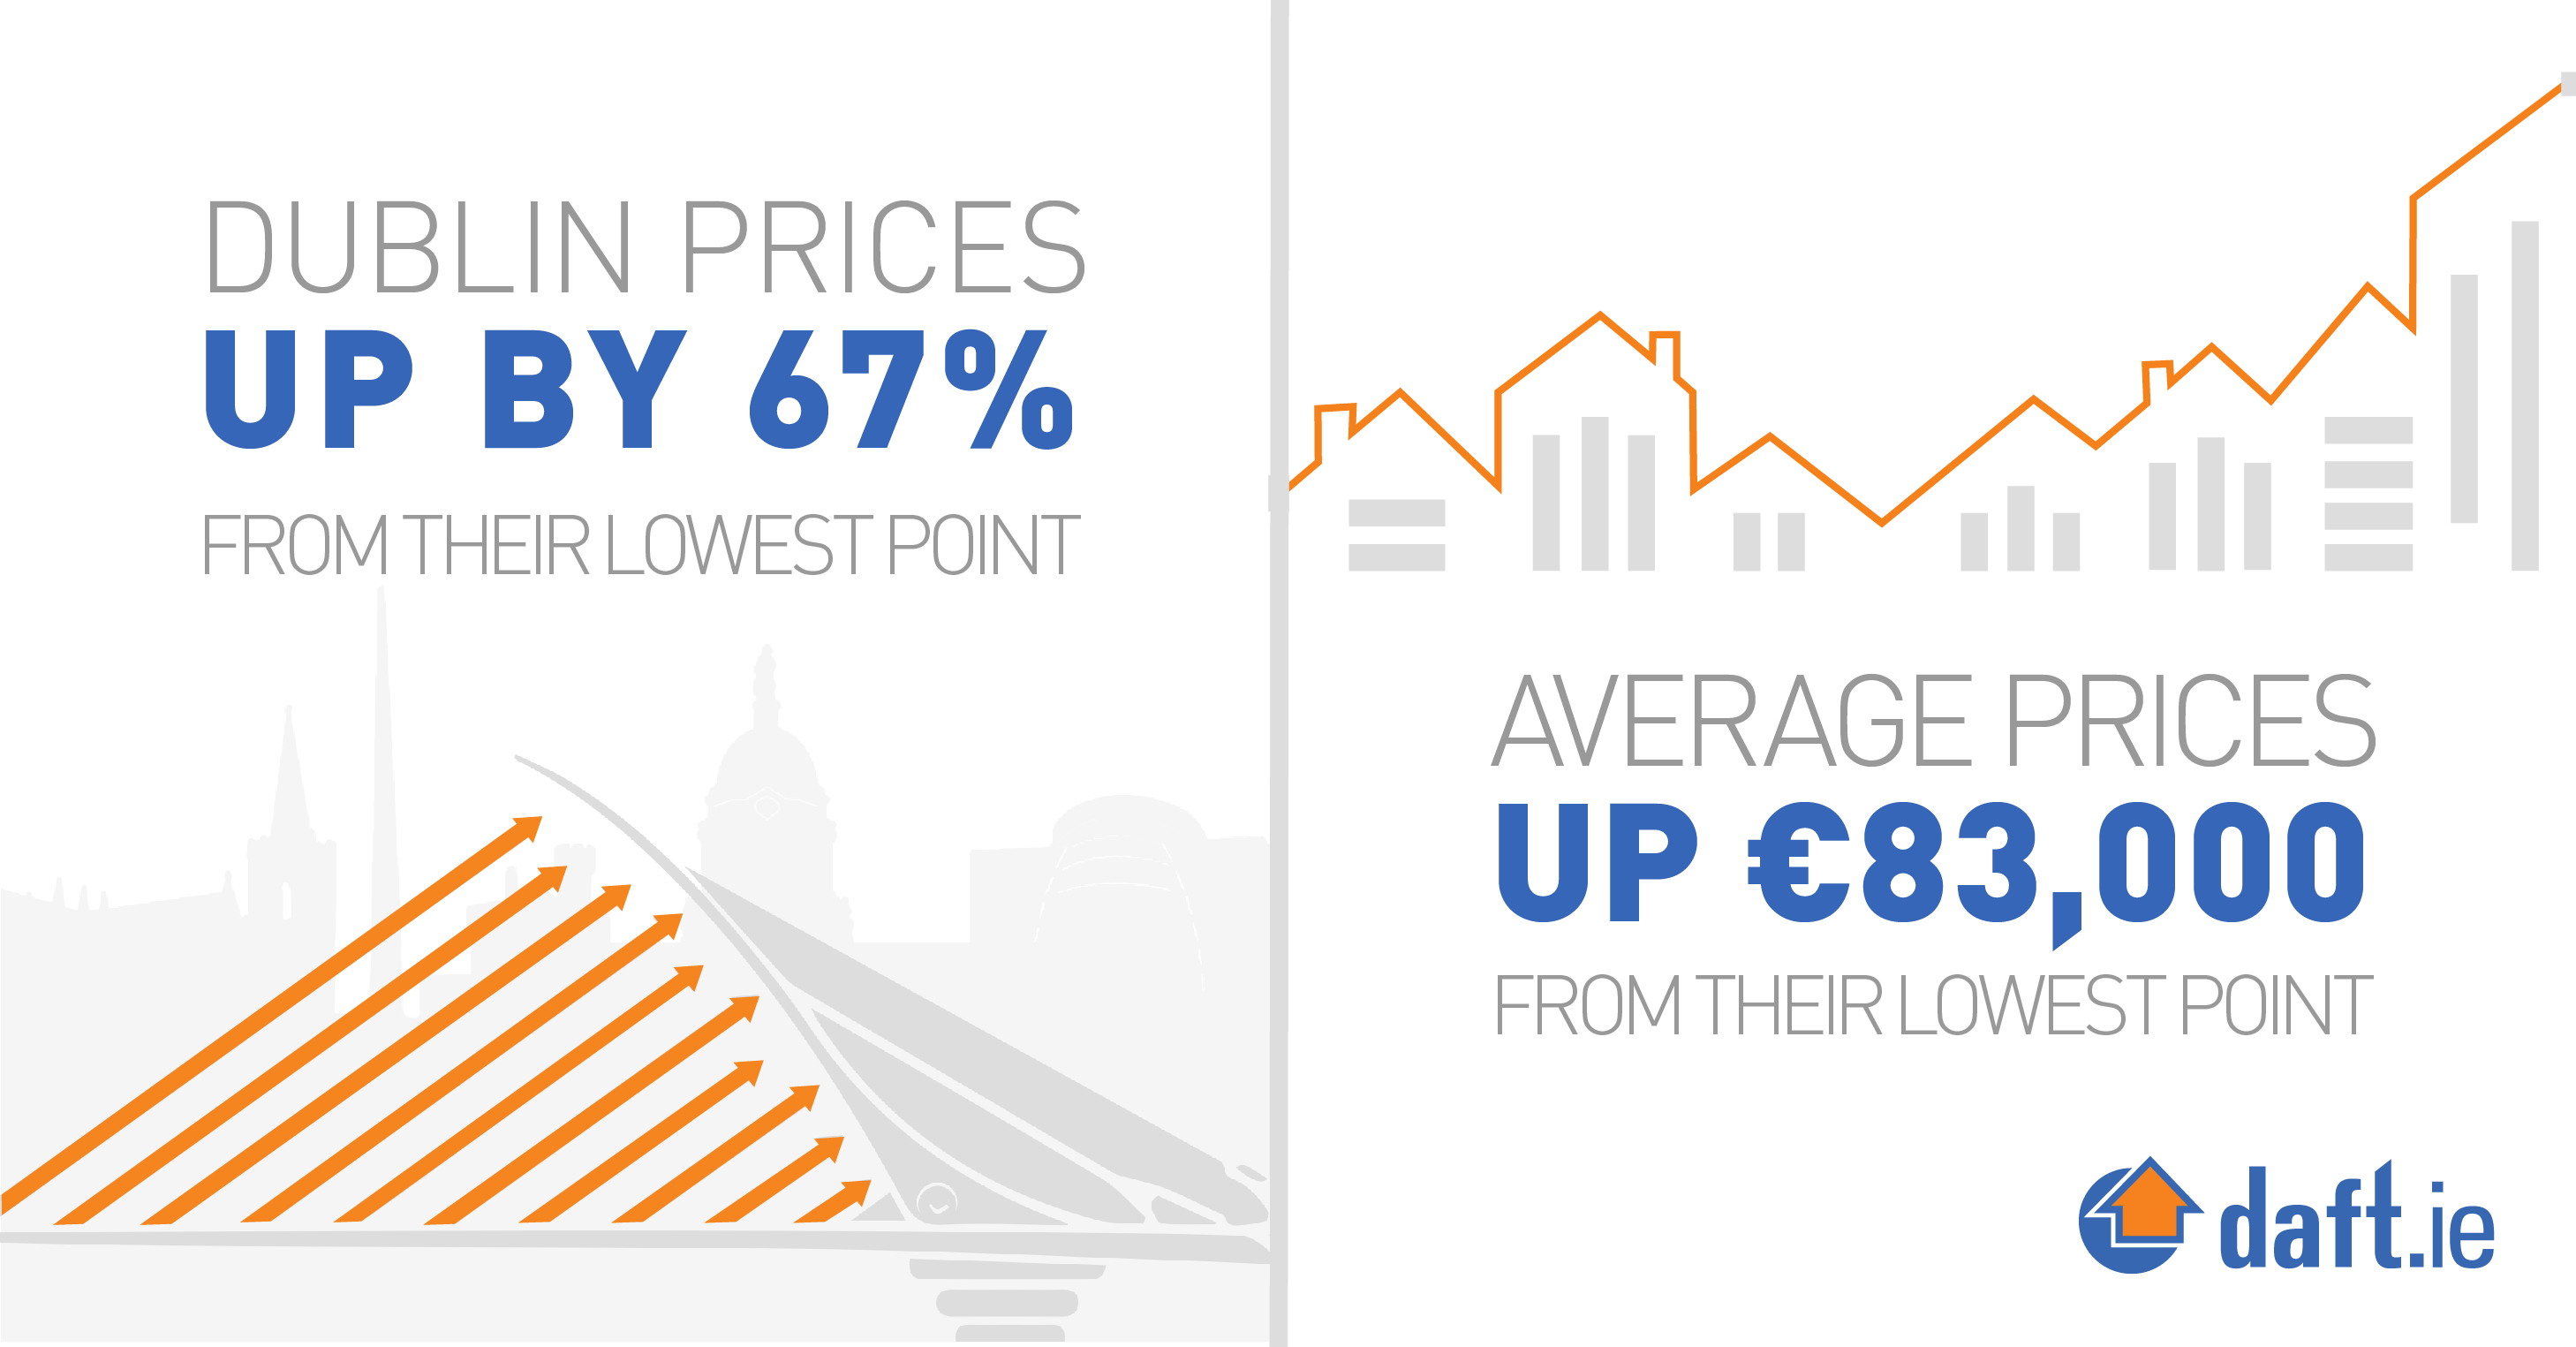 Dublin prices and average prices